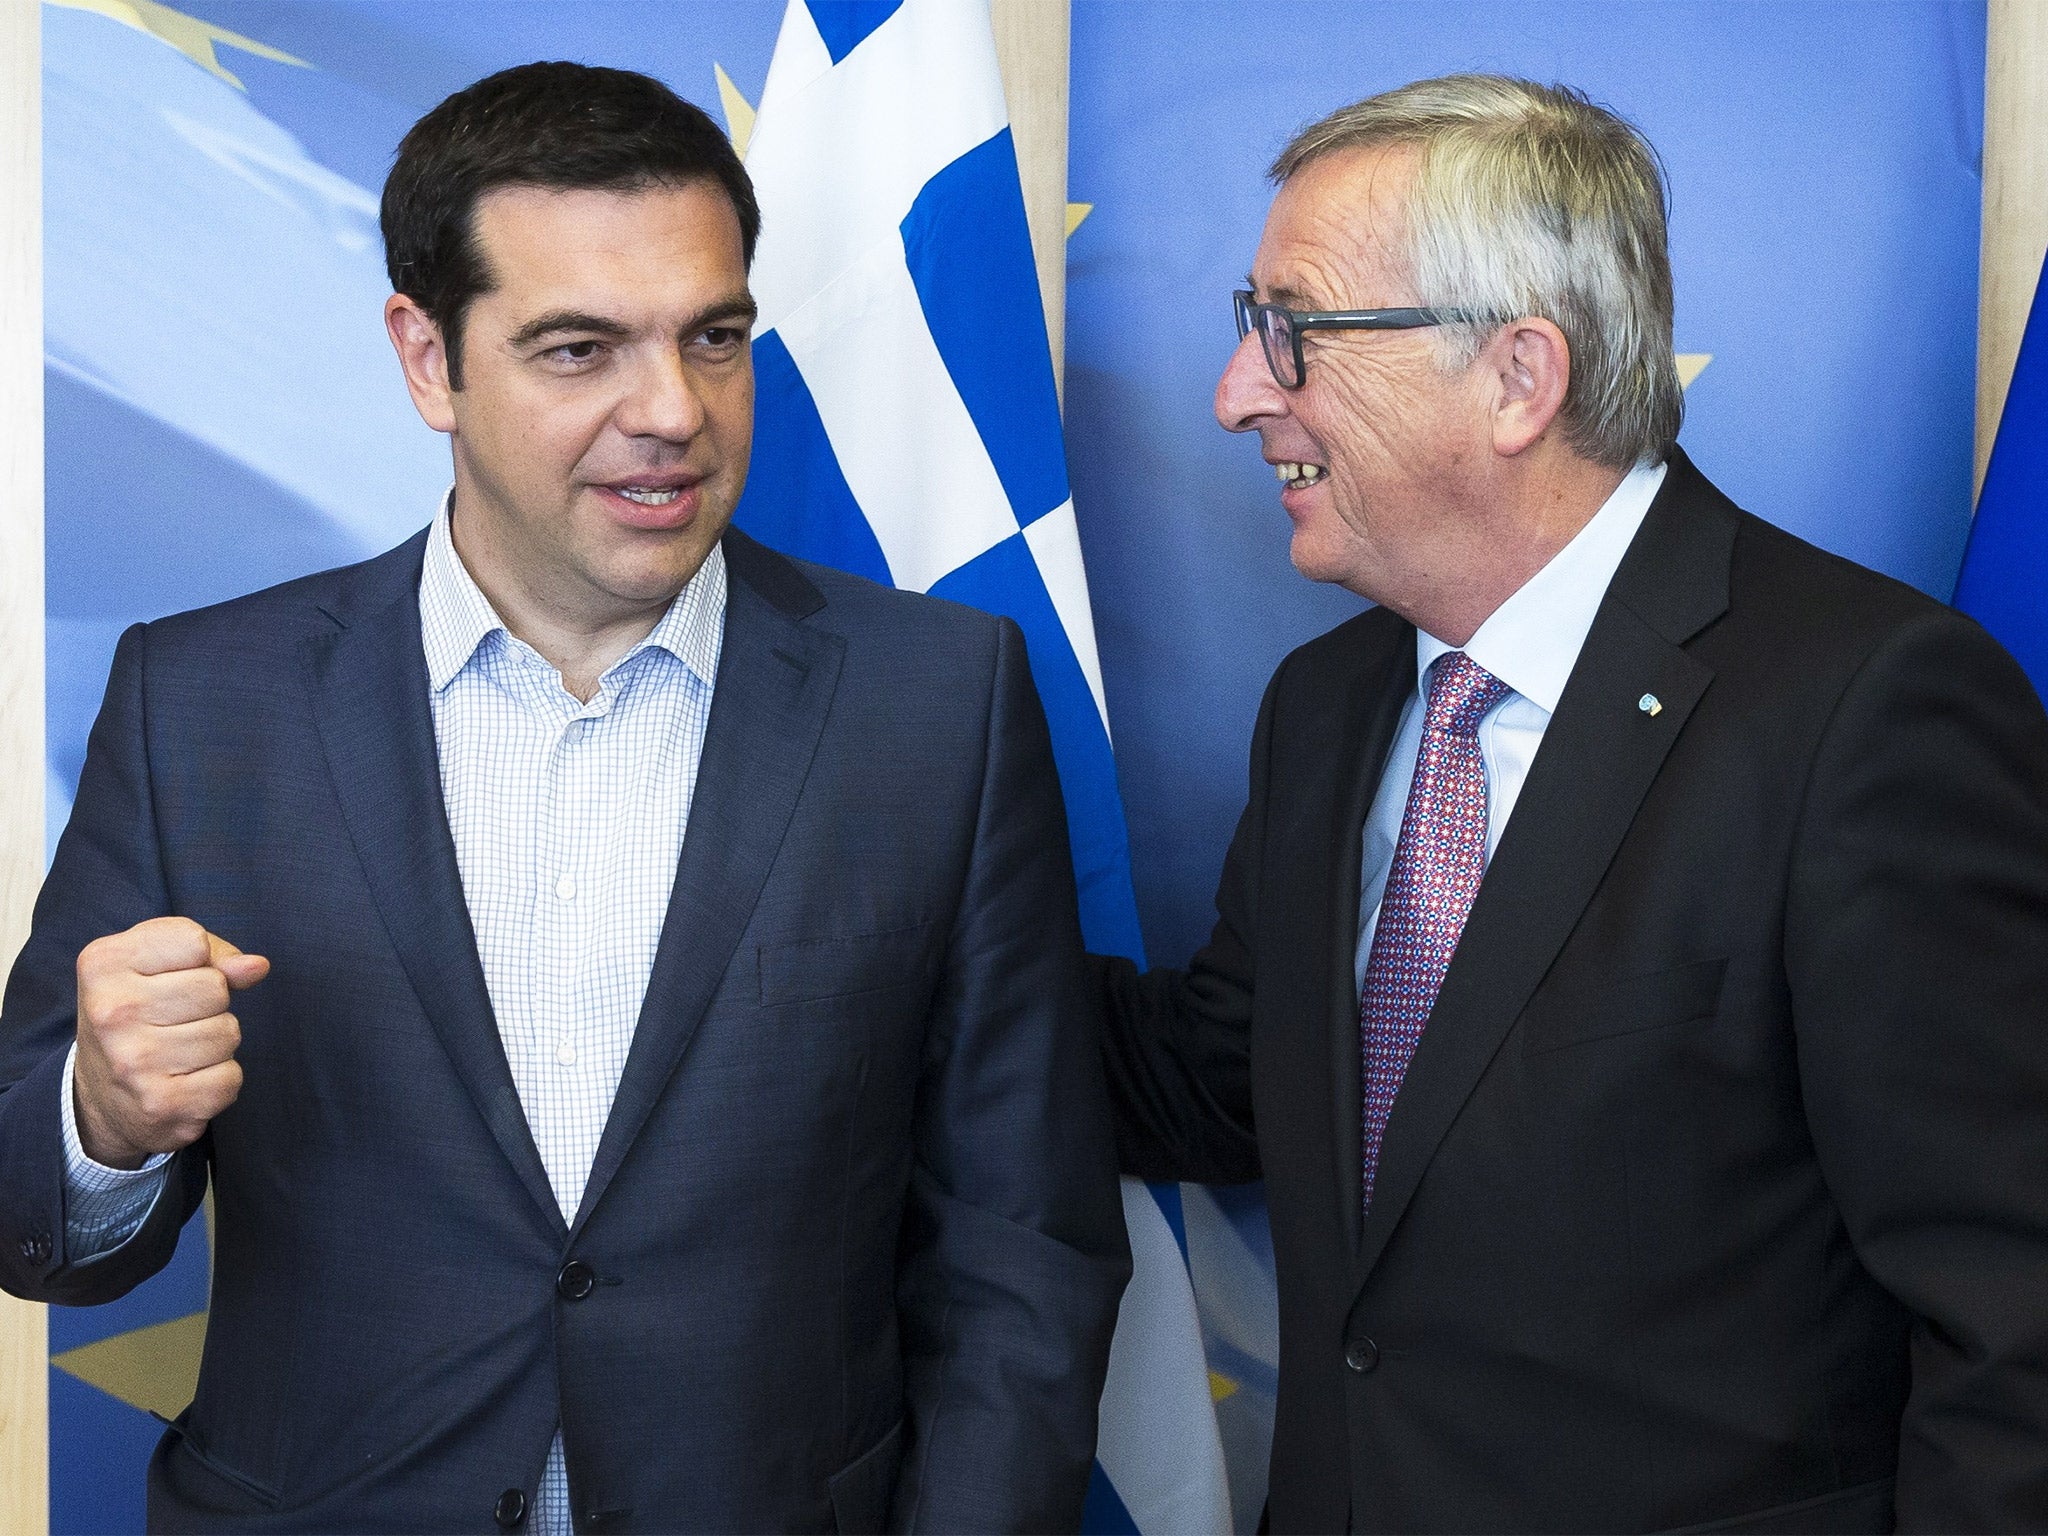 Alexis Tsipras needs to show Greece is not caving in during talks with Jean-Claude Juncker and the EU in Brussels